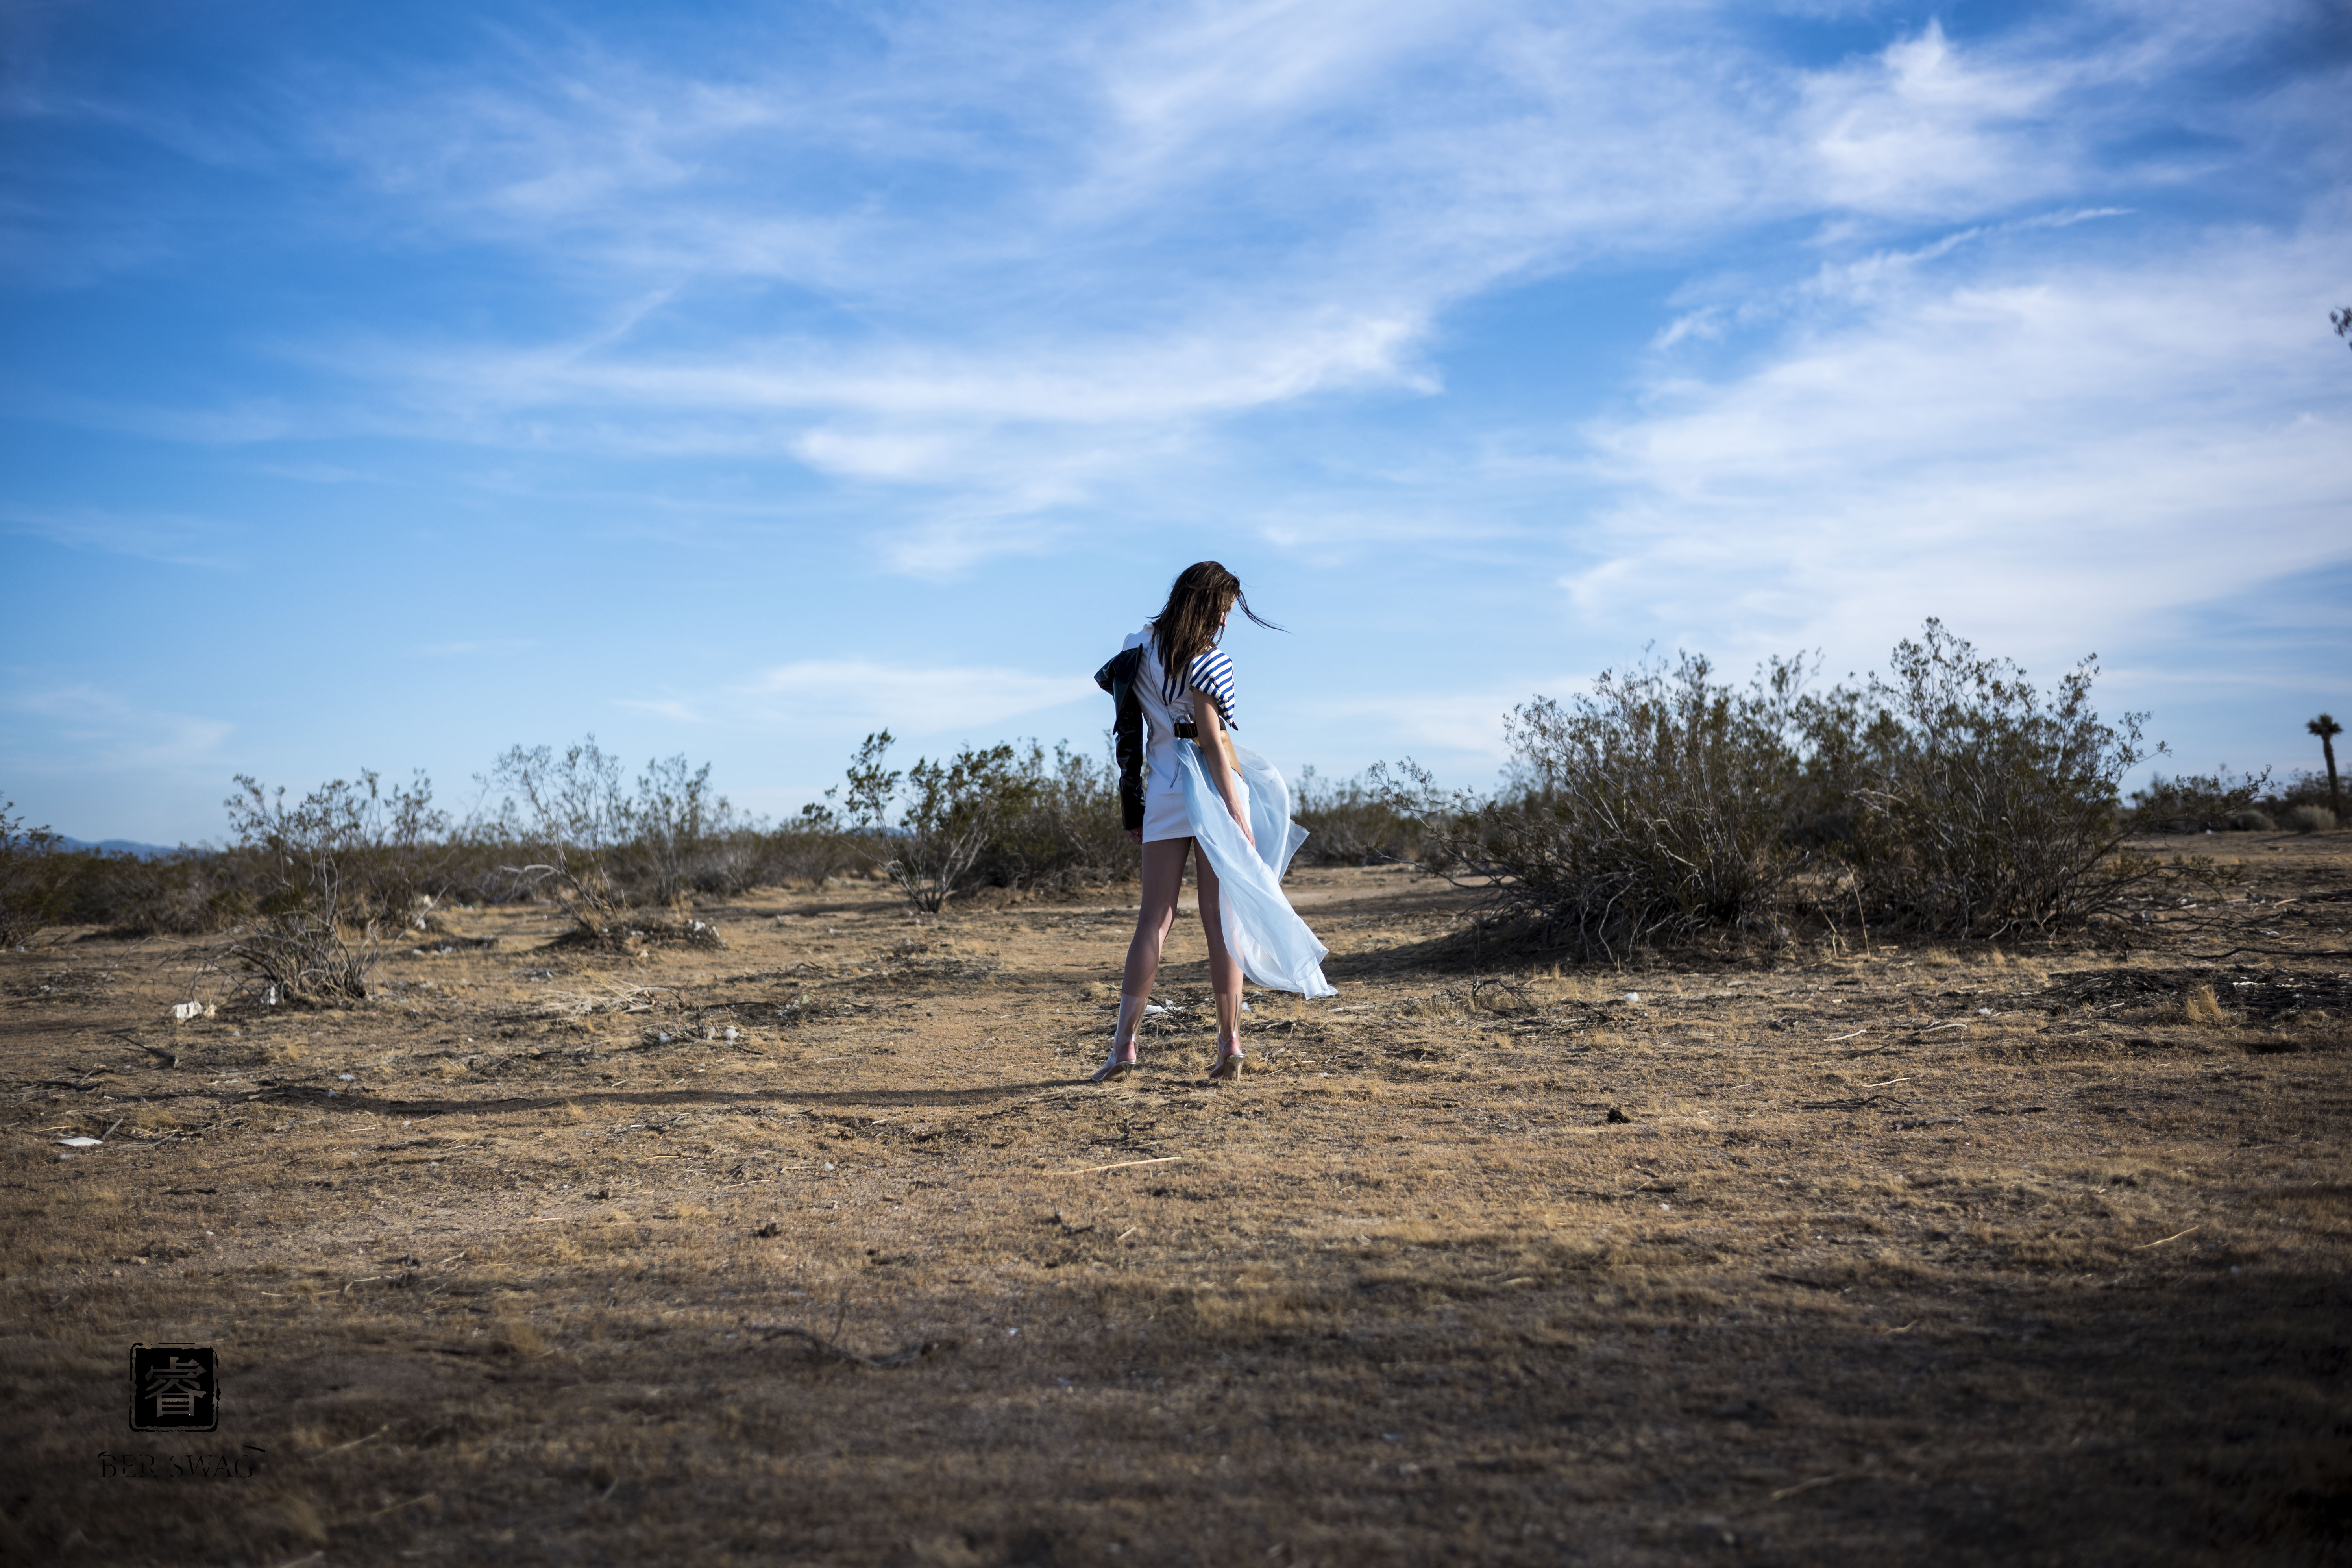 Life in Desert/The Woman Warrior Series/Feminism Embedded in Fashion